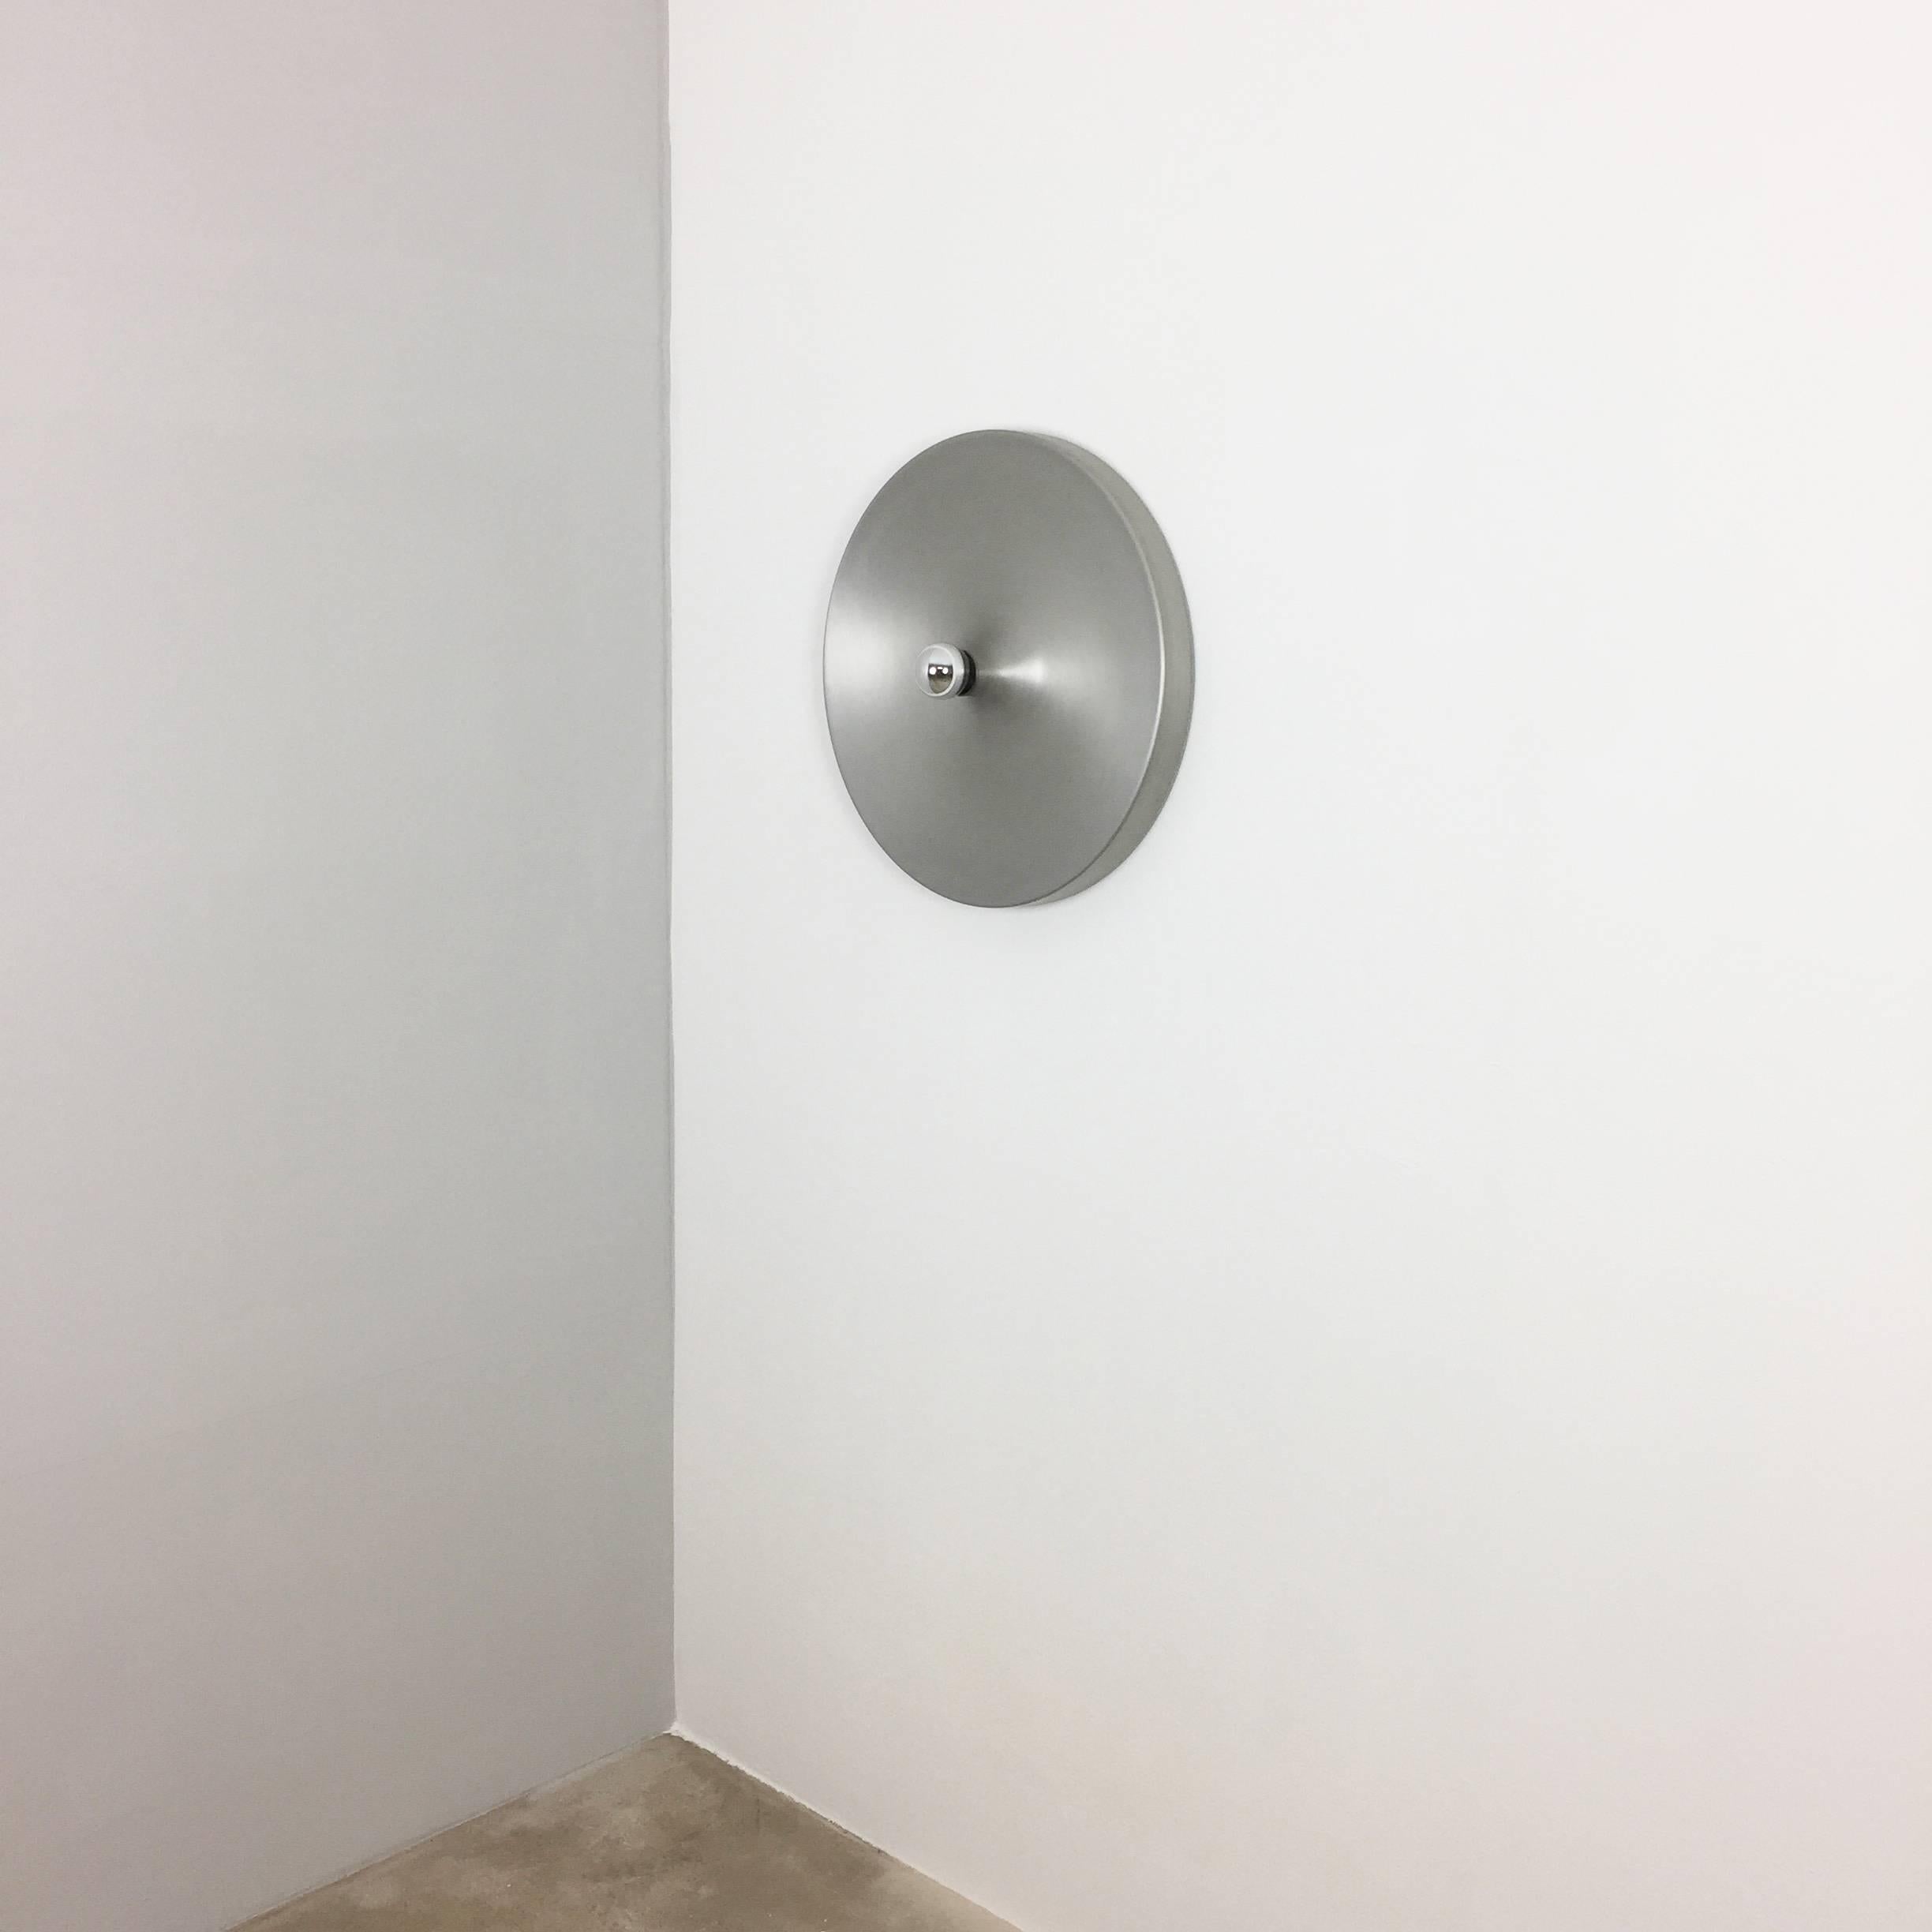 Article:

Extra large wall light sconce


Producer:

Staff lights



Origin:

Germany



Age:

1970s



Description:

Original 1960s modernist German wall Light made of solid metal. This super rare wall light was produced in